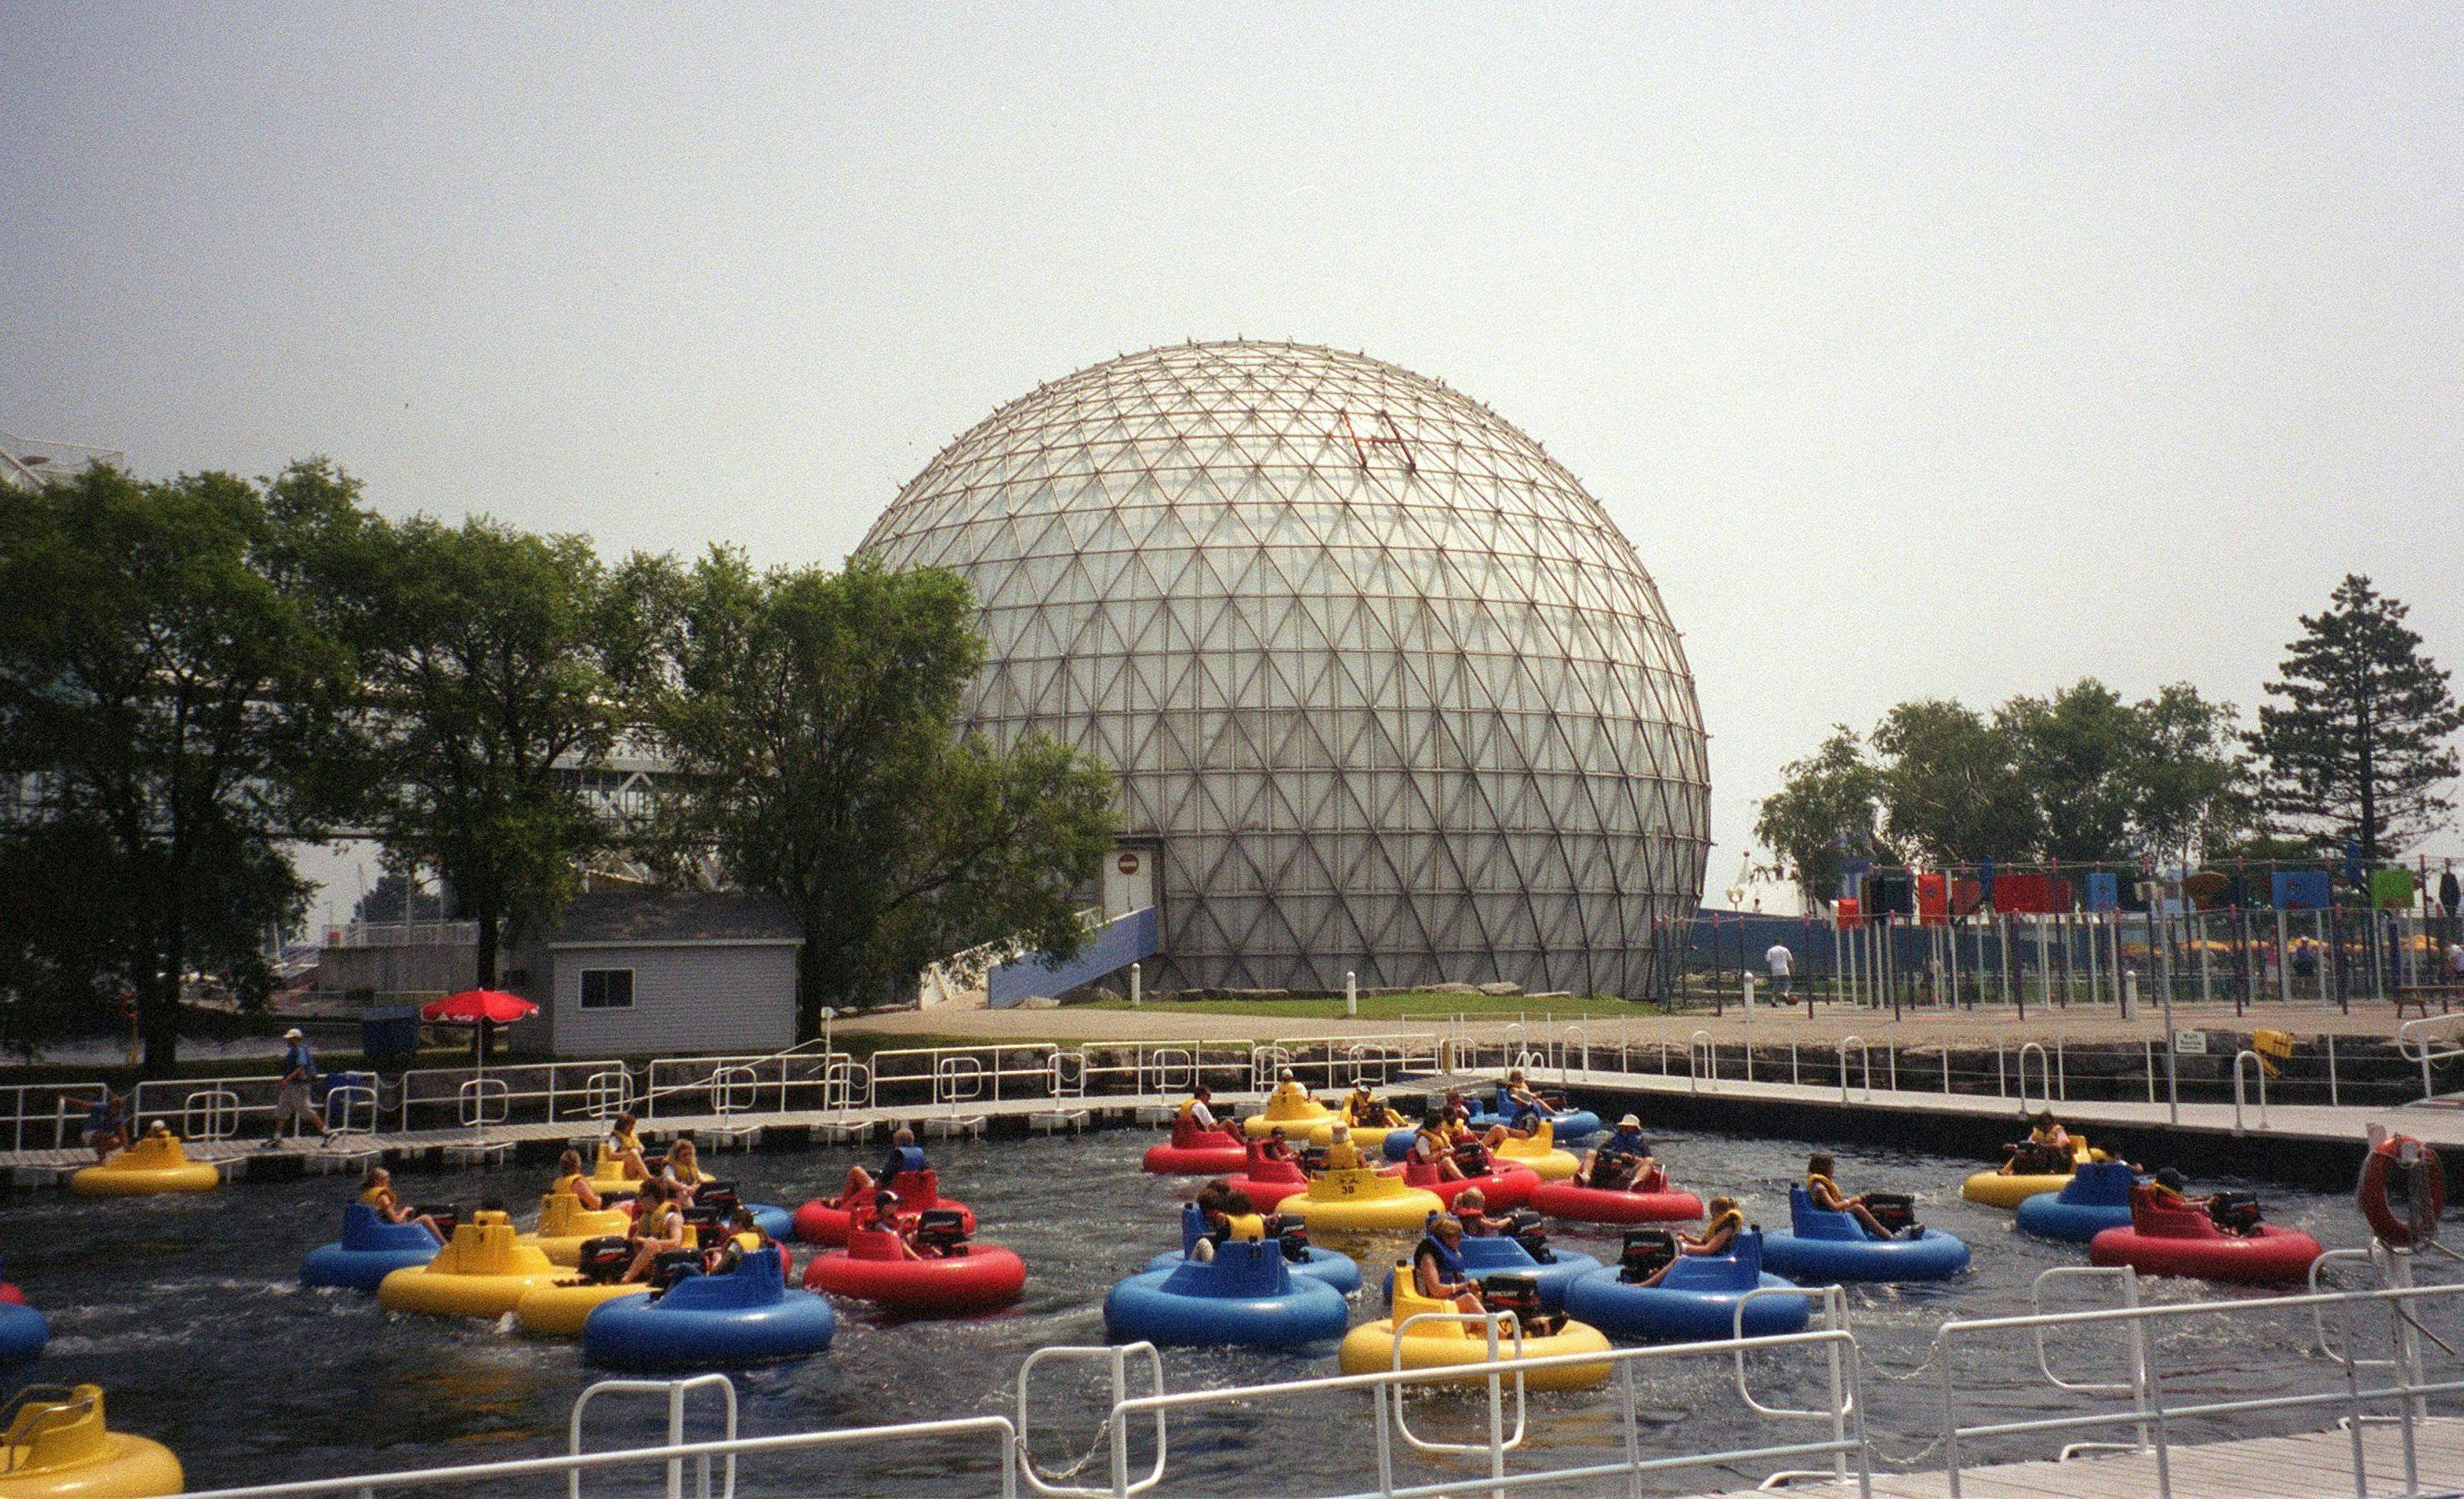 Ontario Place redevelopment not a good deal for Ontarians, critics say